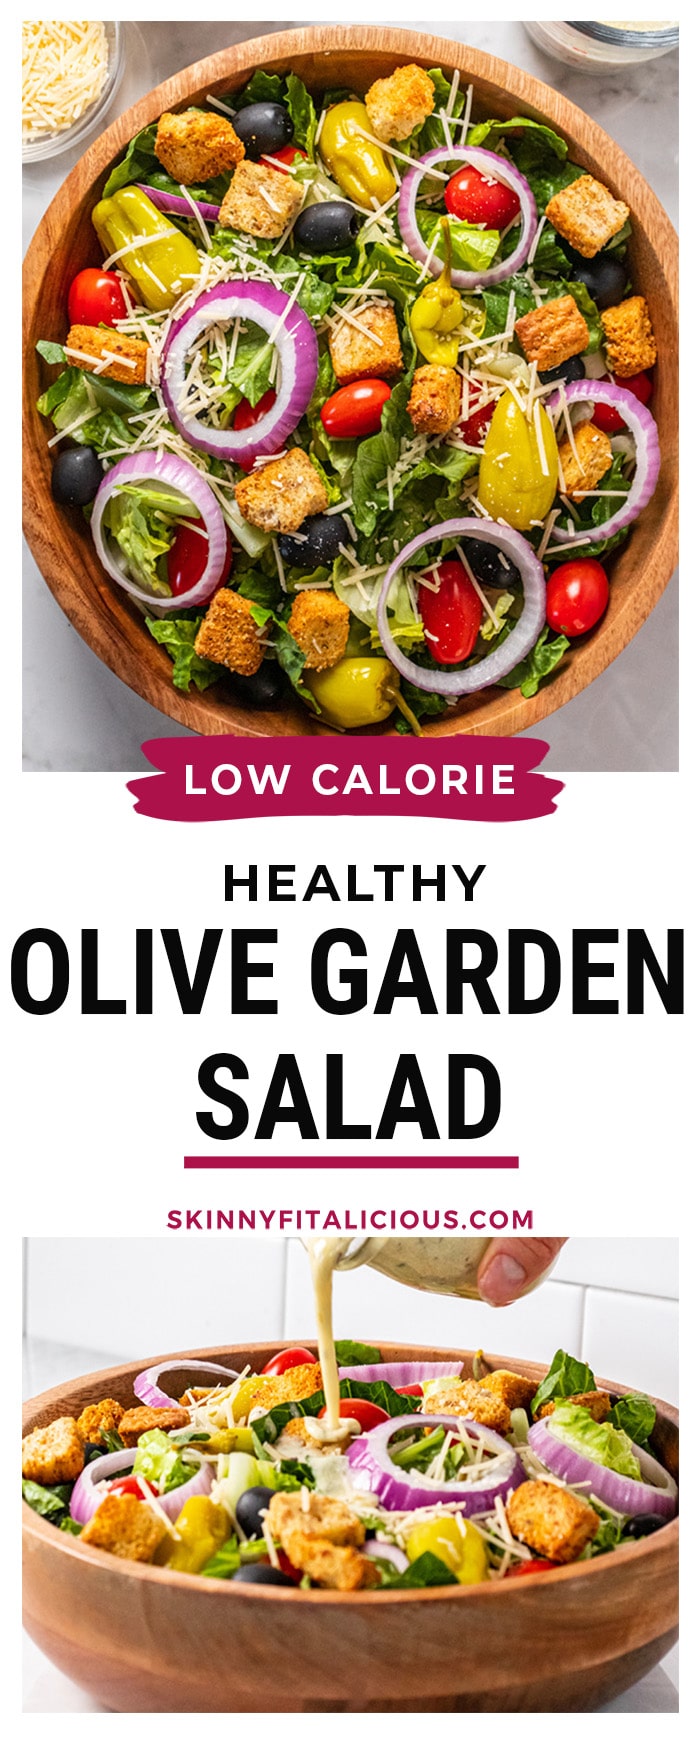 Healthy Olive Garden Salad is a copycat recipe that tastes just like the restaurant version you love! A lighter salad recipe with fresh vegetables and topped with a lower calorie dressing!